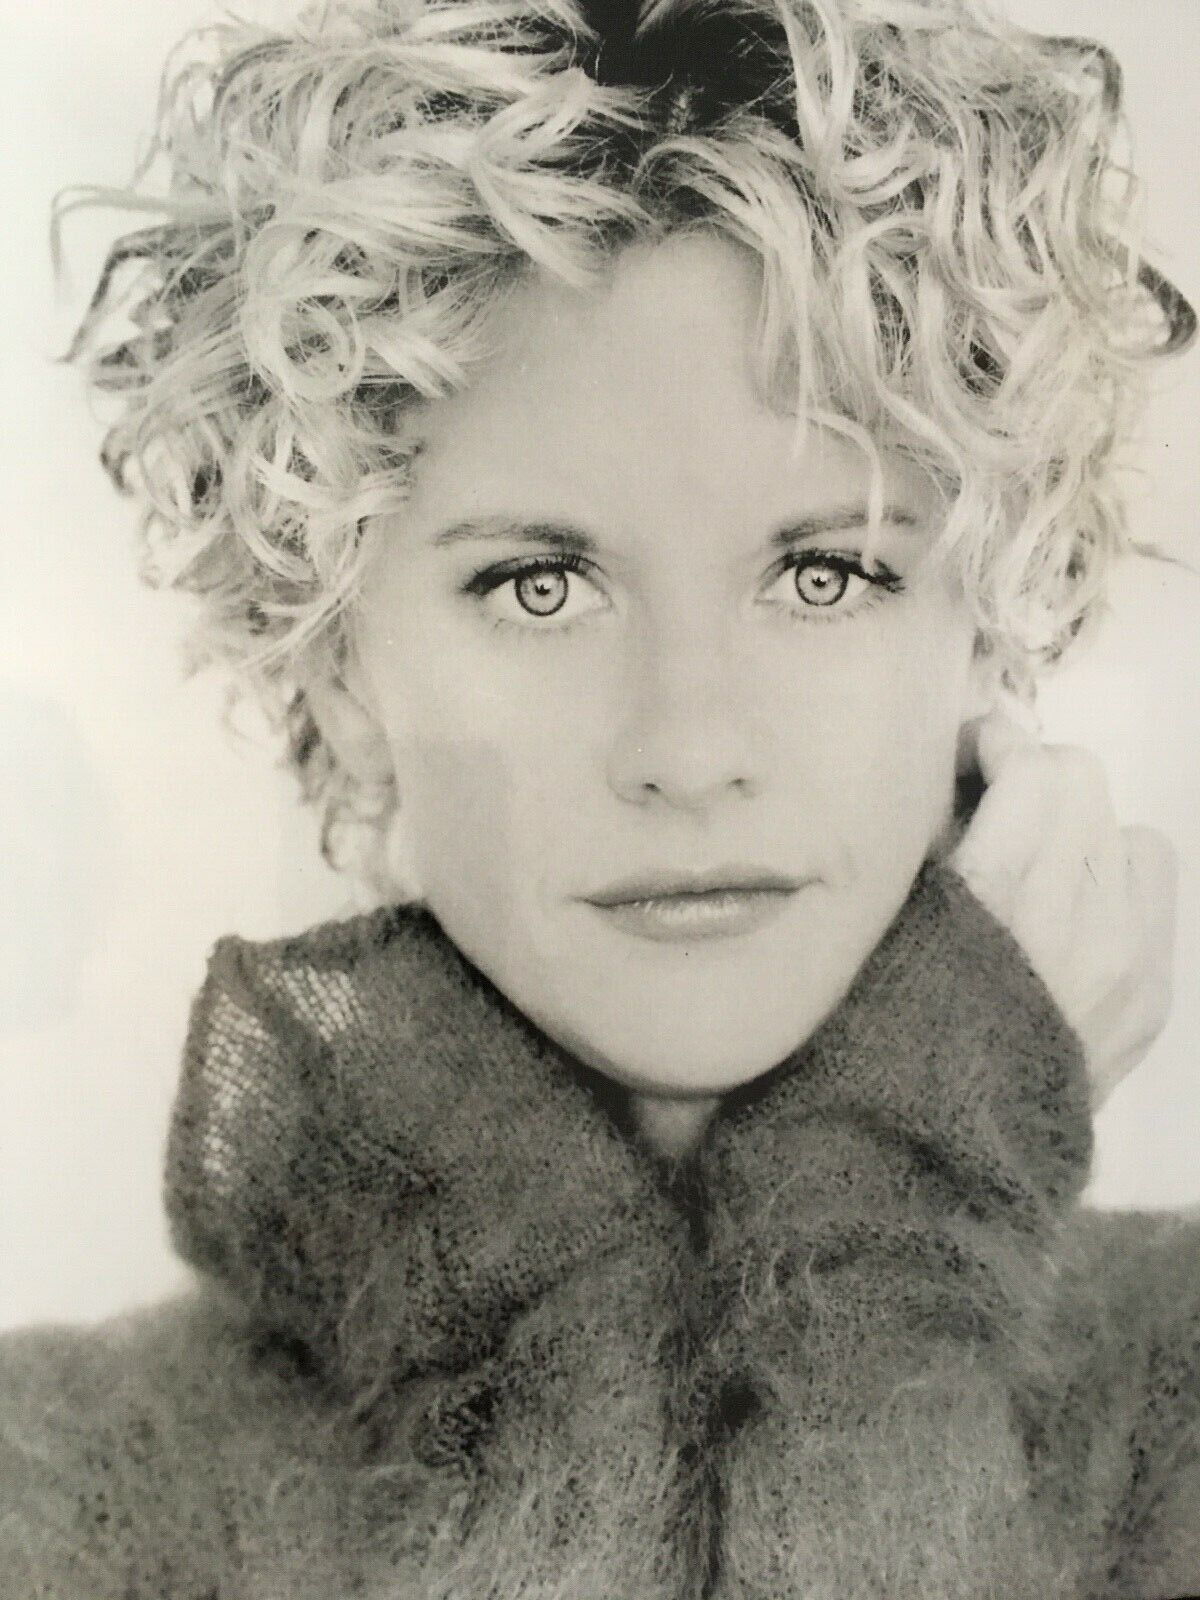 MELANIE GRIFFITHS - POPULAR AMERICAN ACTRESS - SUPERB UNSIGNED Photo Poster paintingGRAPH